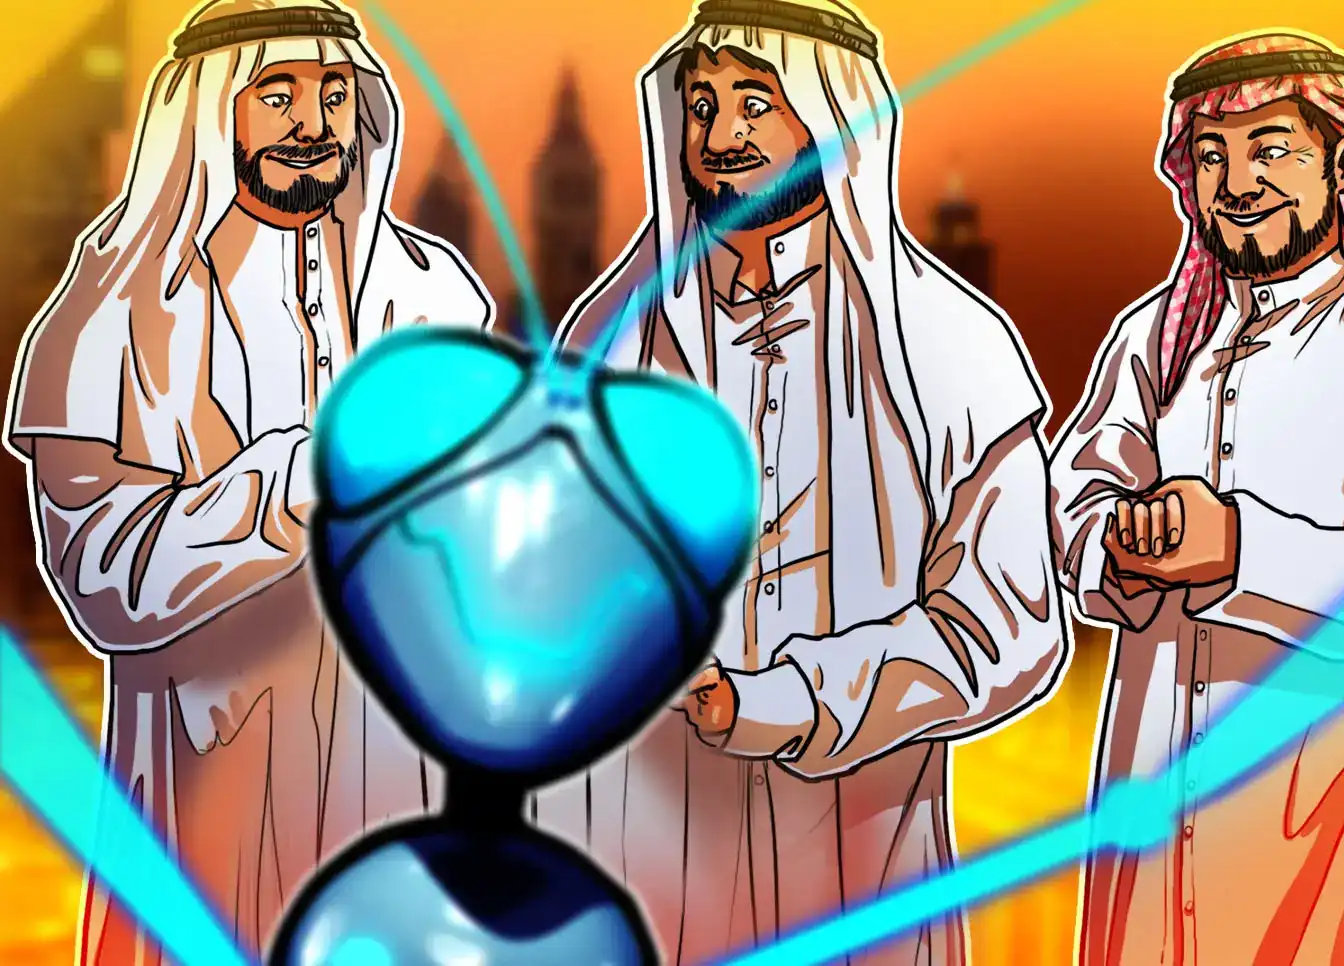 Saudi Arabia Launches Cultural Universe Metaverse on Founding Day